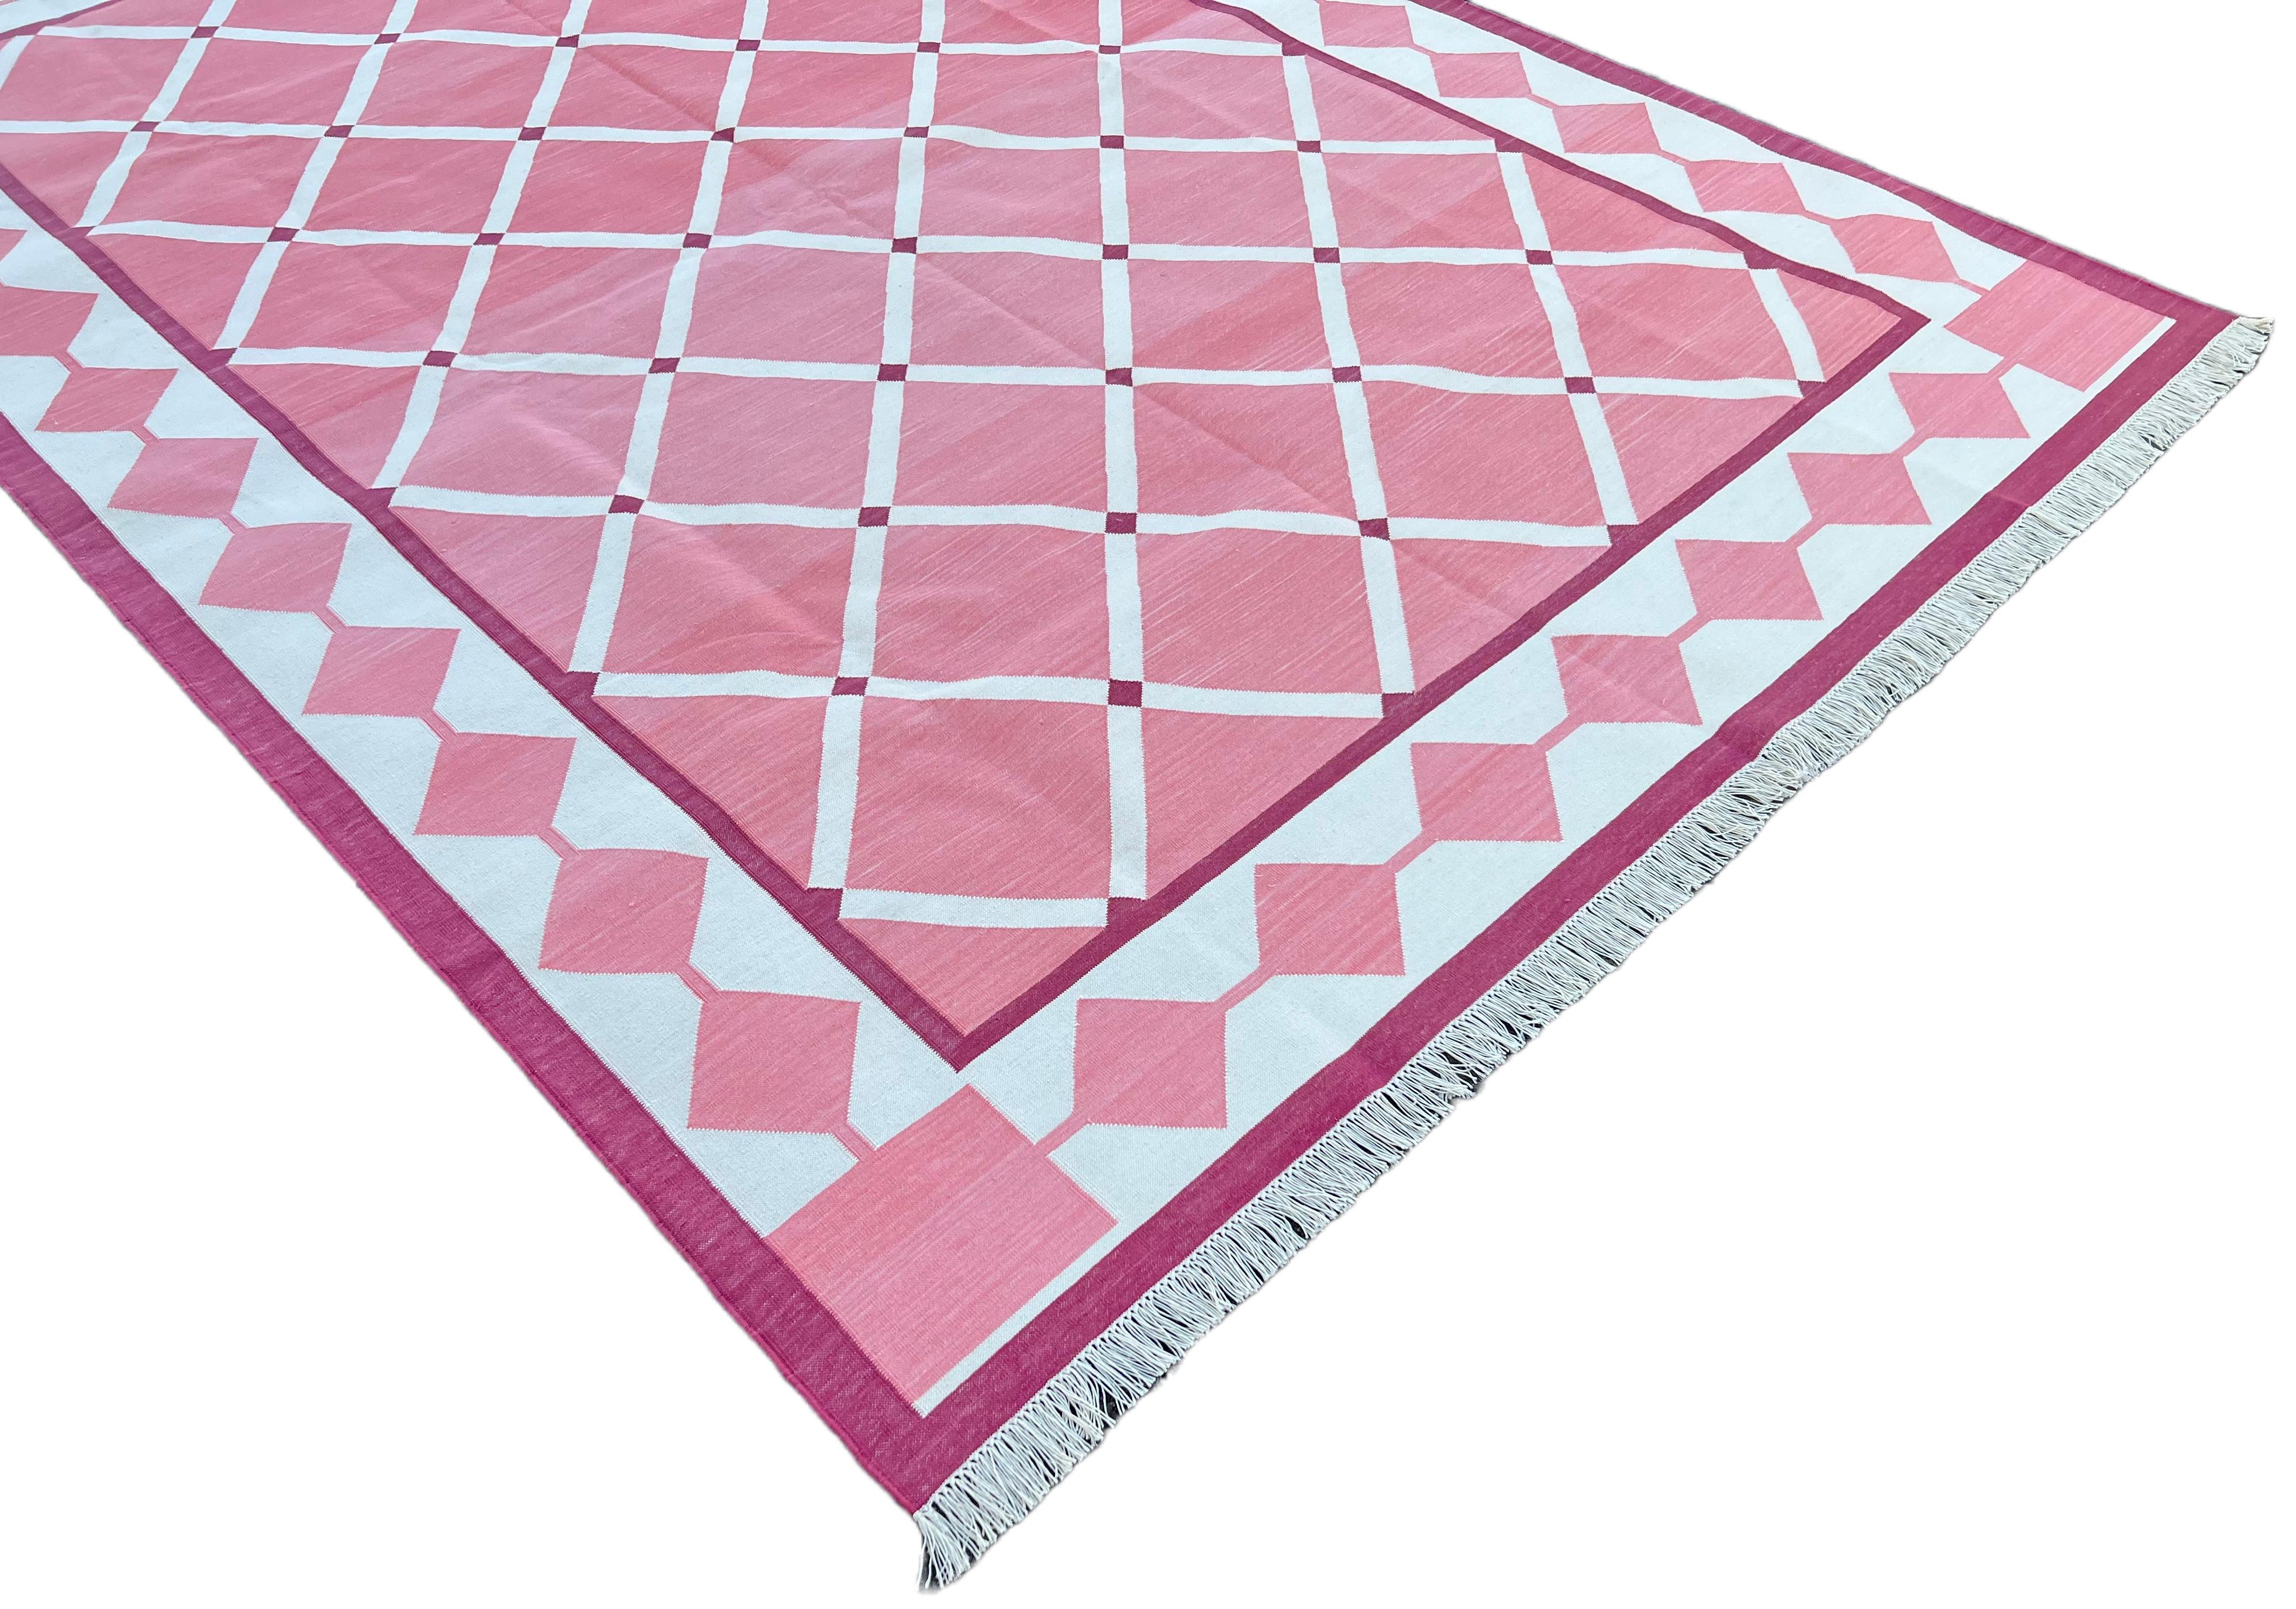 Hand-Woven Handmade Cotton Area Flat Weave Rug, 6x9 Pink And White Geometric Indian Dhurrie For Sale